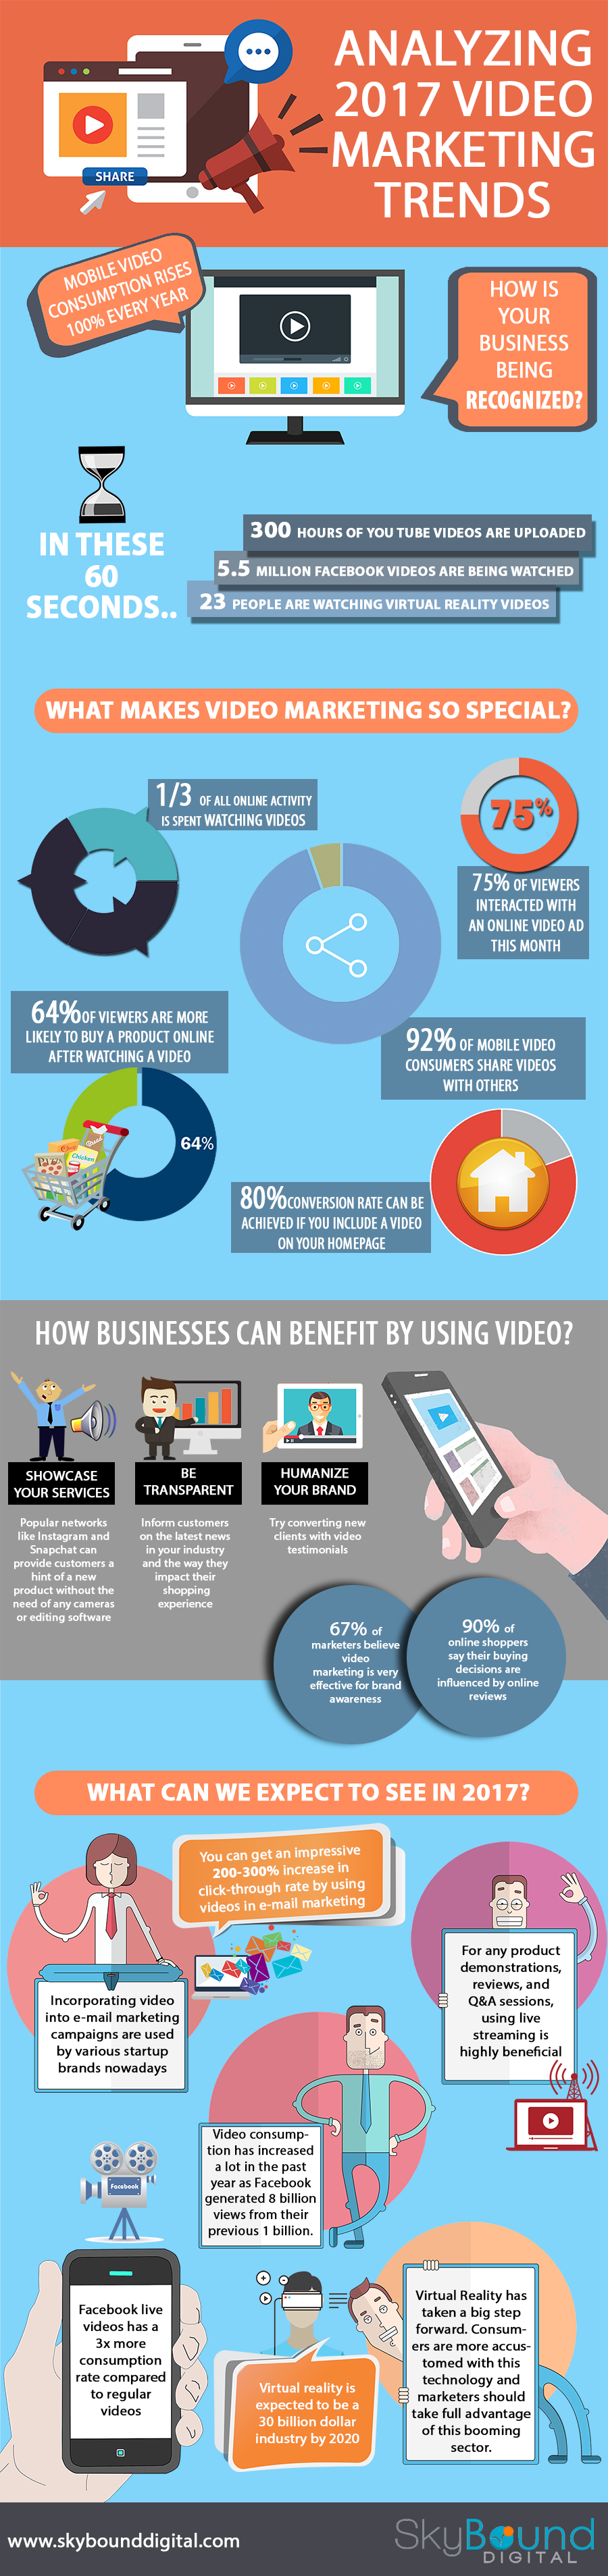 Analyzing 2017 Video Marketing Trends Infographic